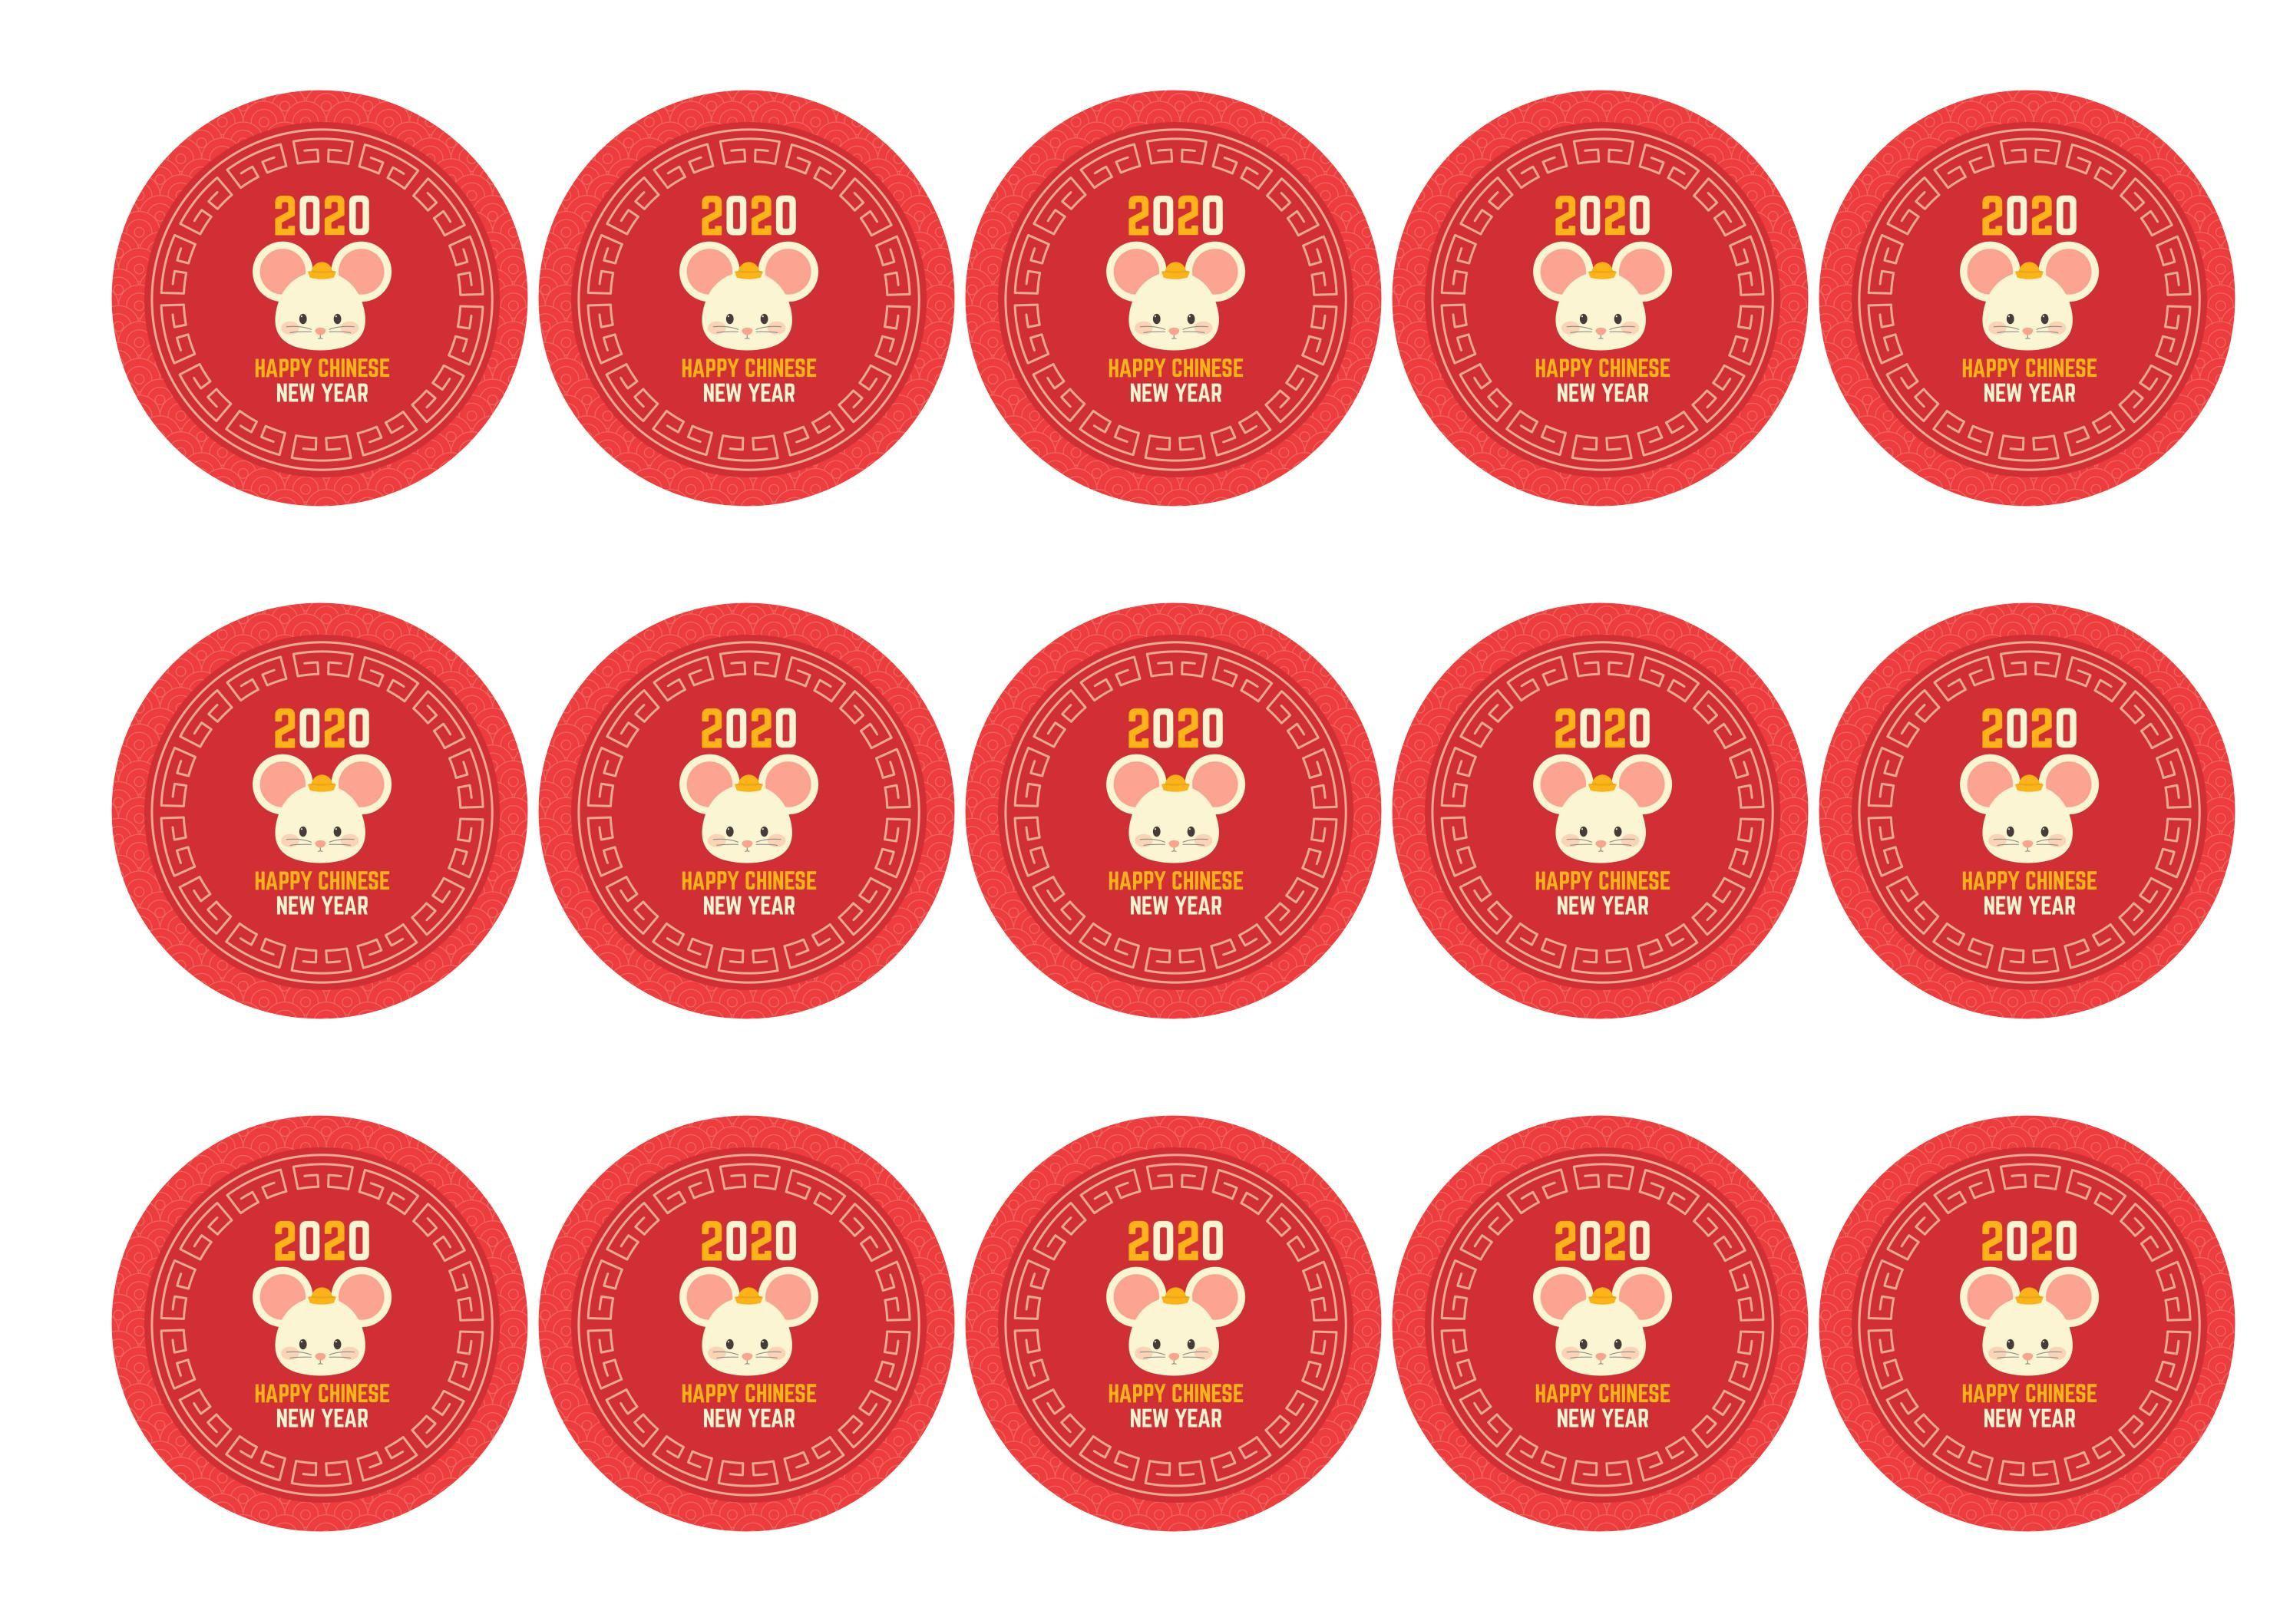 15 printed toppers celebrating 2020 - the Year of the Rat for Chinese New Year